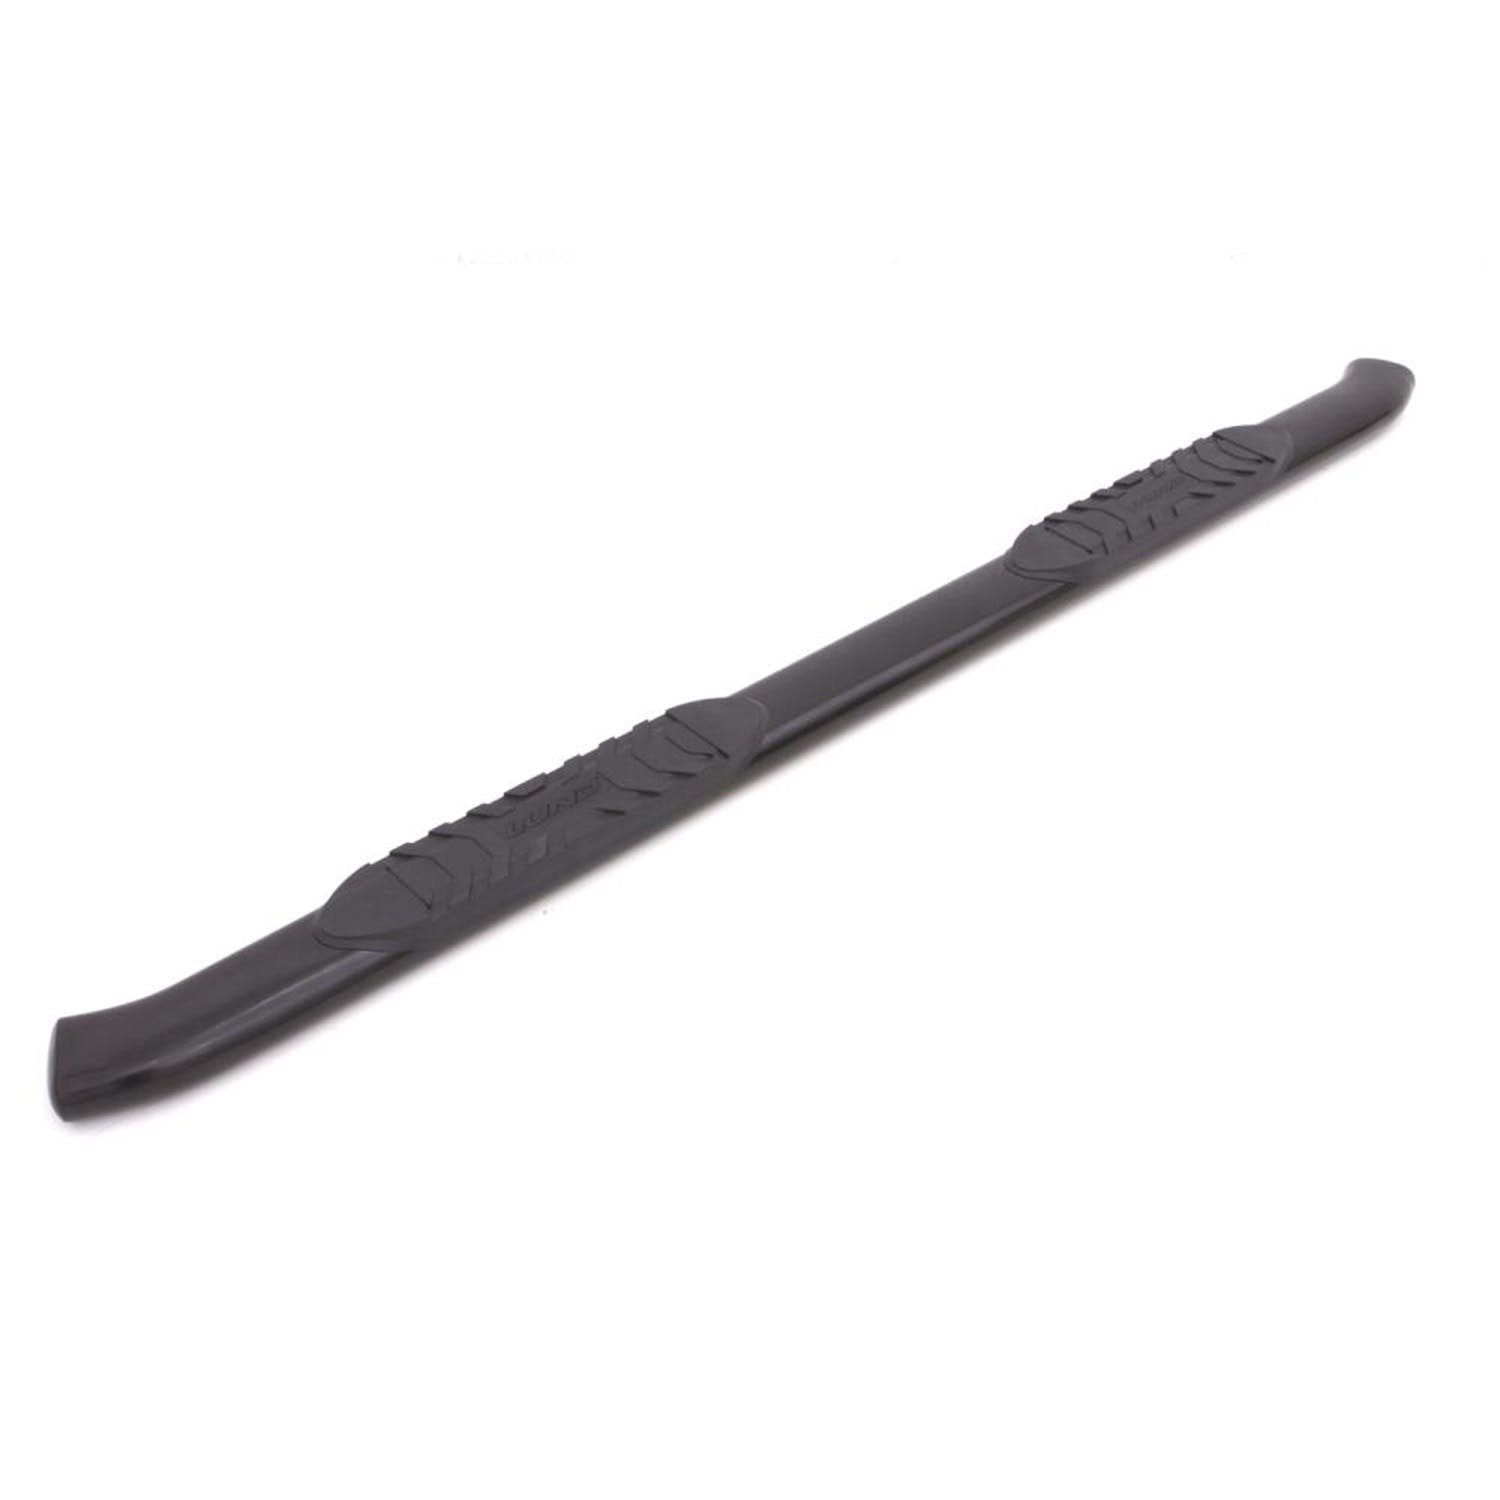 LUND 24282092 5 Inch Oval Curved Nerf Bar - Black LUND -5 inch CURVED OVAL BLACK SS